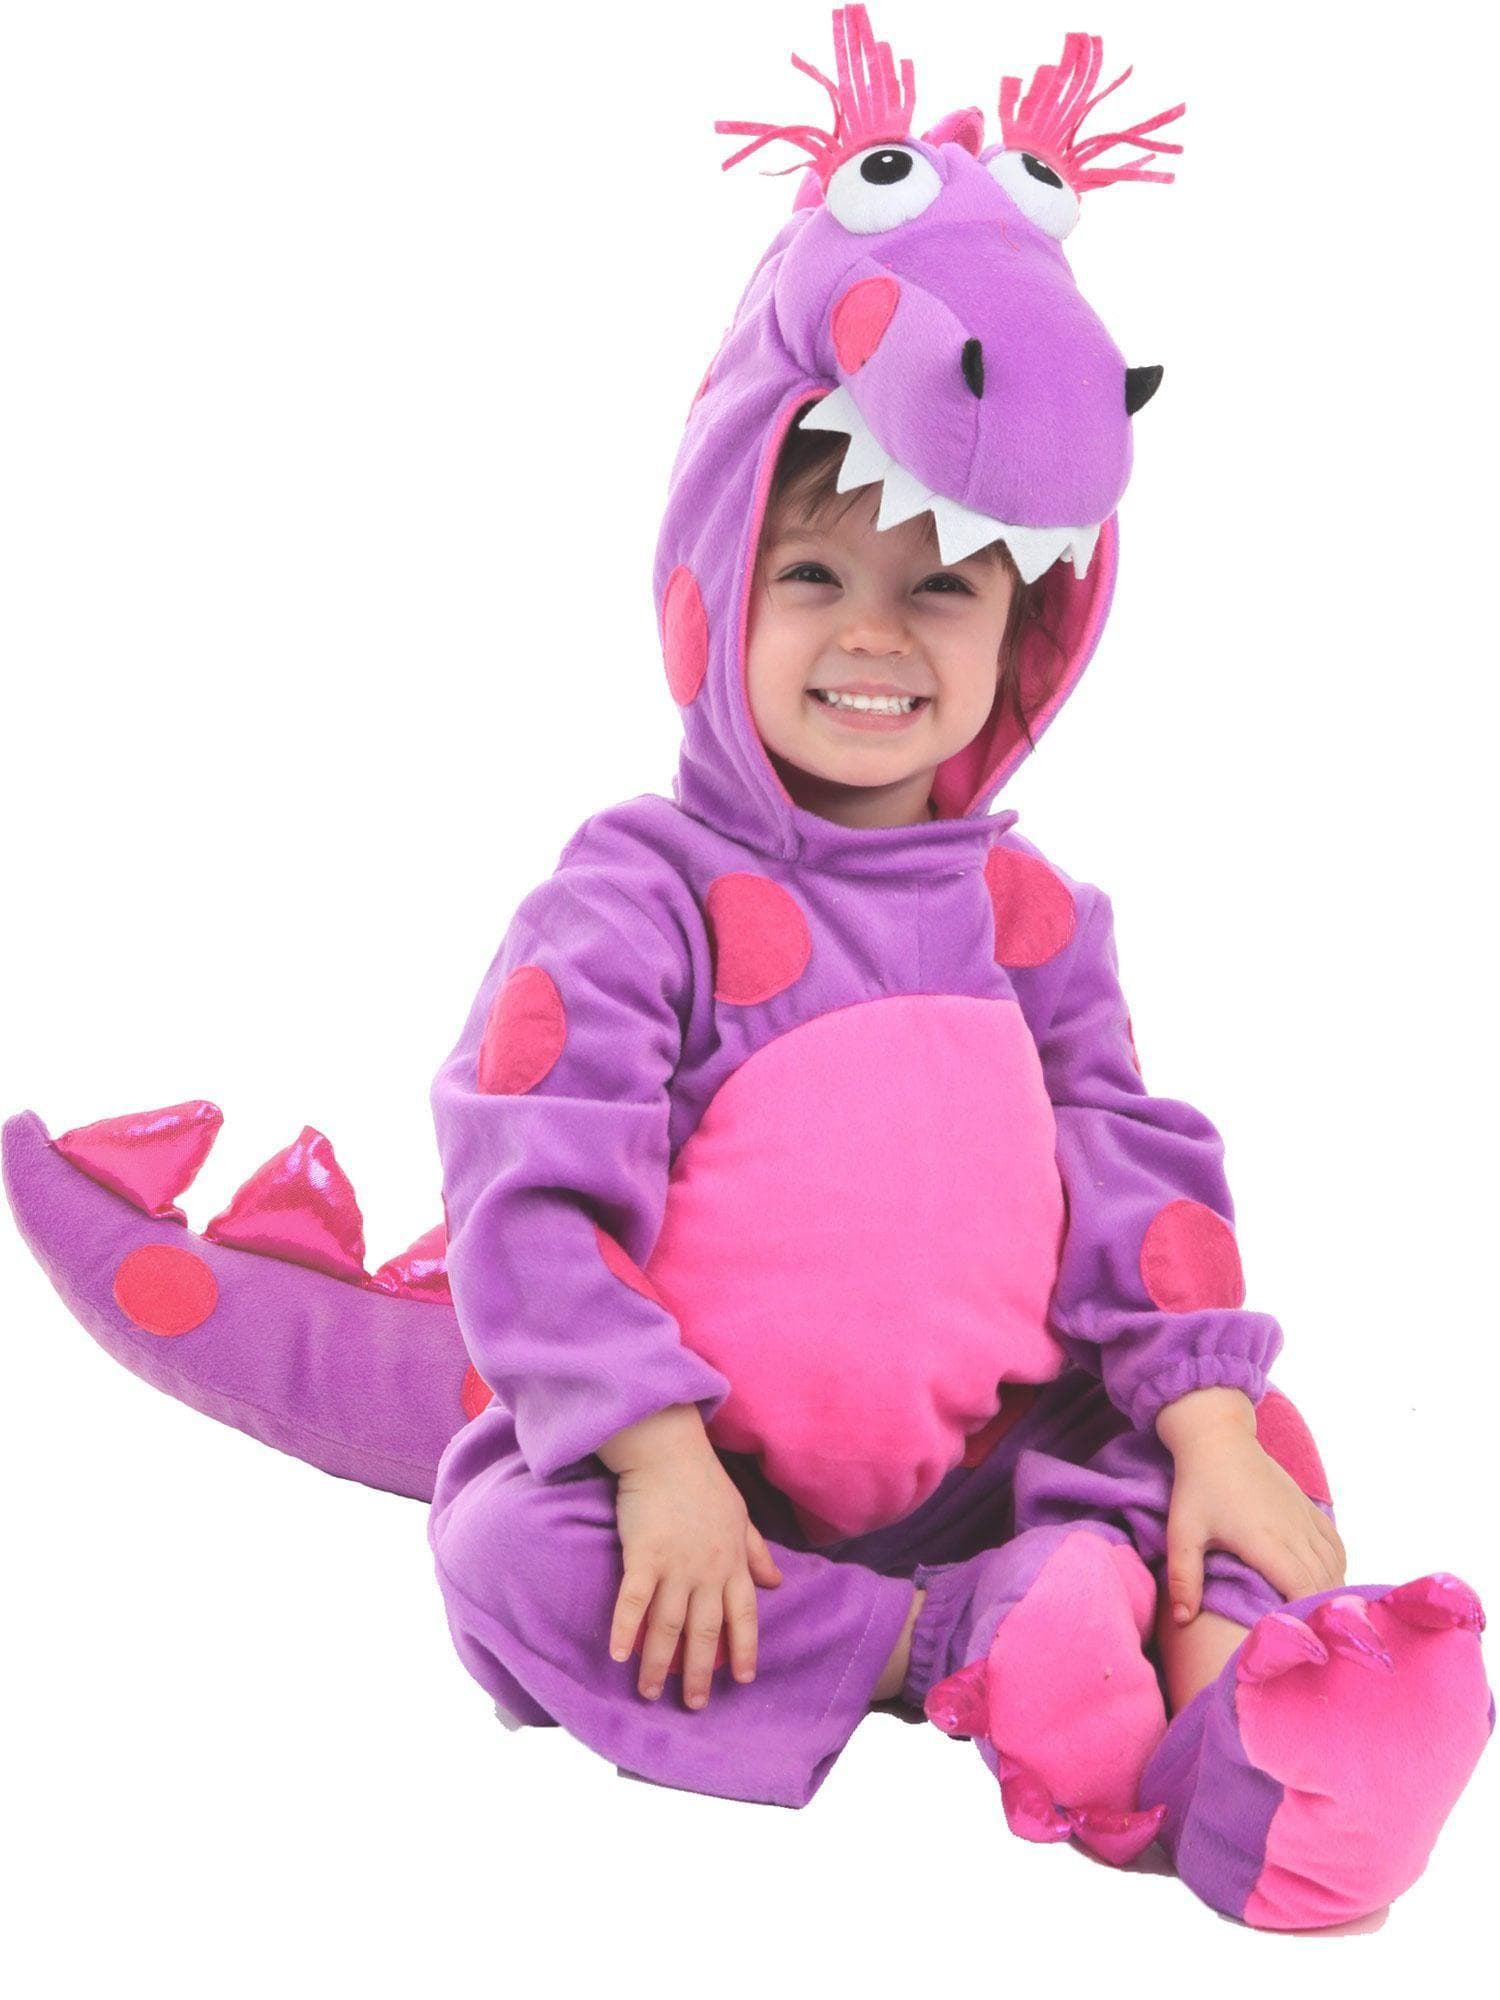 Baby/Toddler Teagan The Dragon Costume - costumes.com